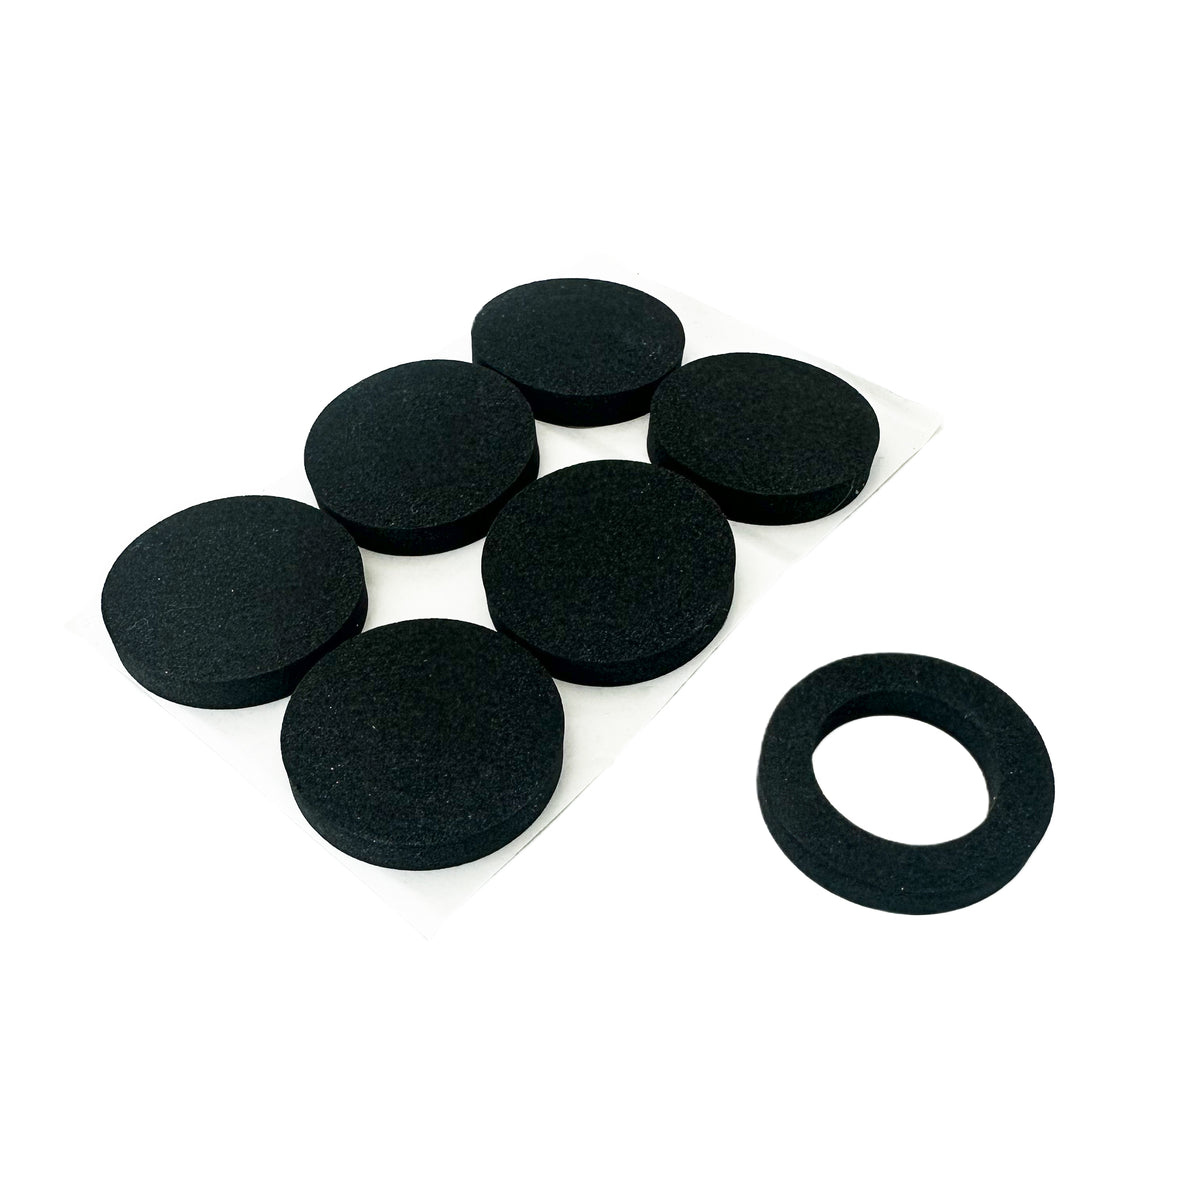 Guide Ring Replacements - 6 pack